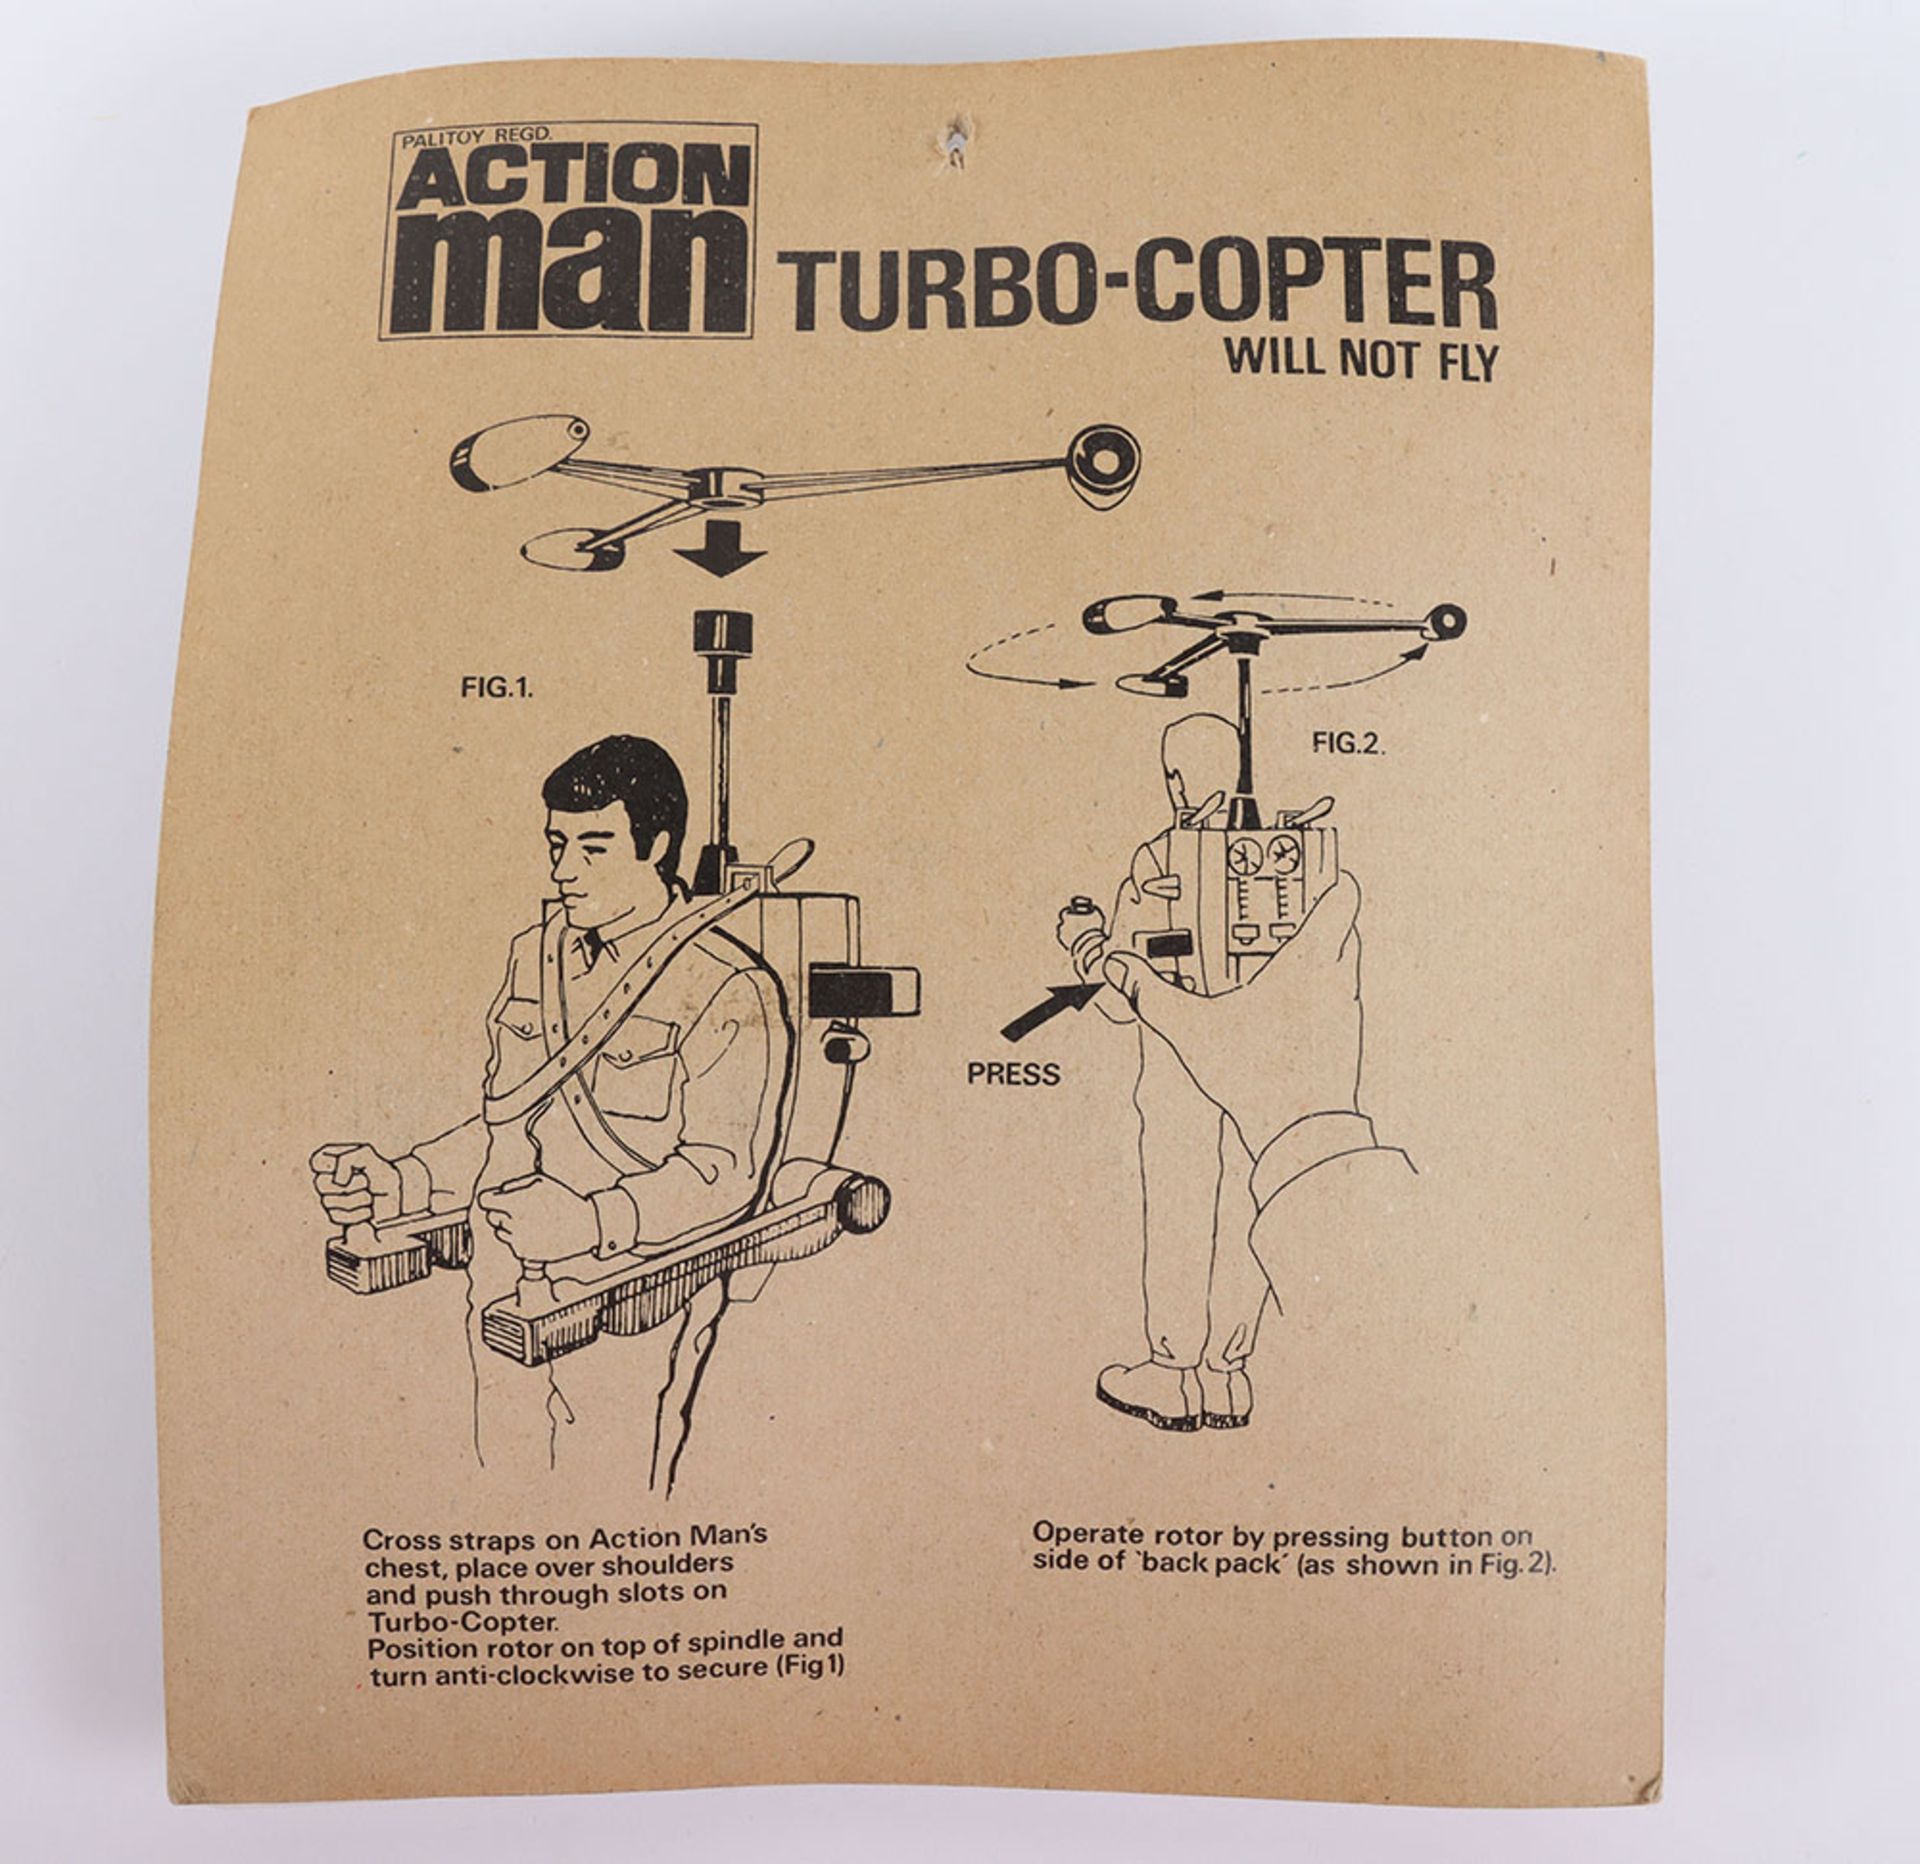 Palitoy Action Man Turbo-Copter - Image 2 of 4